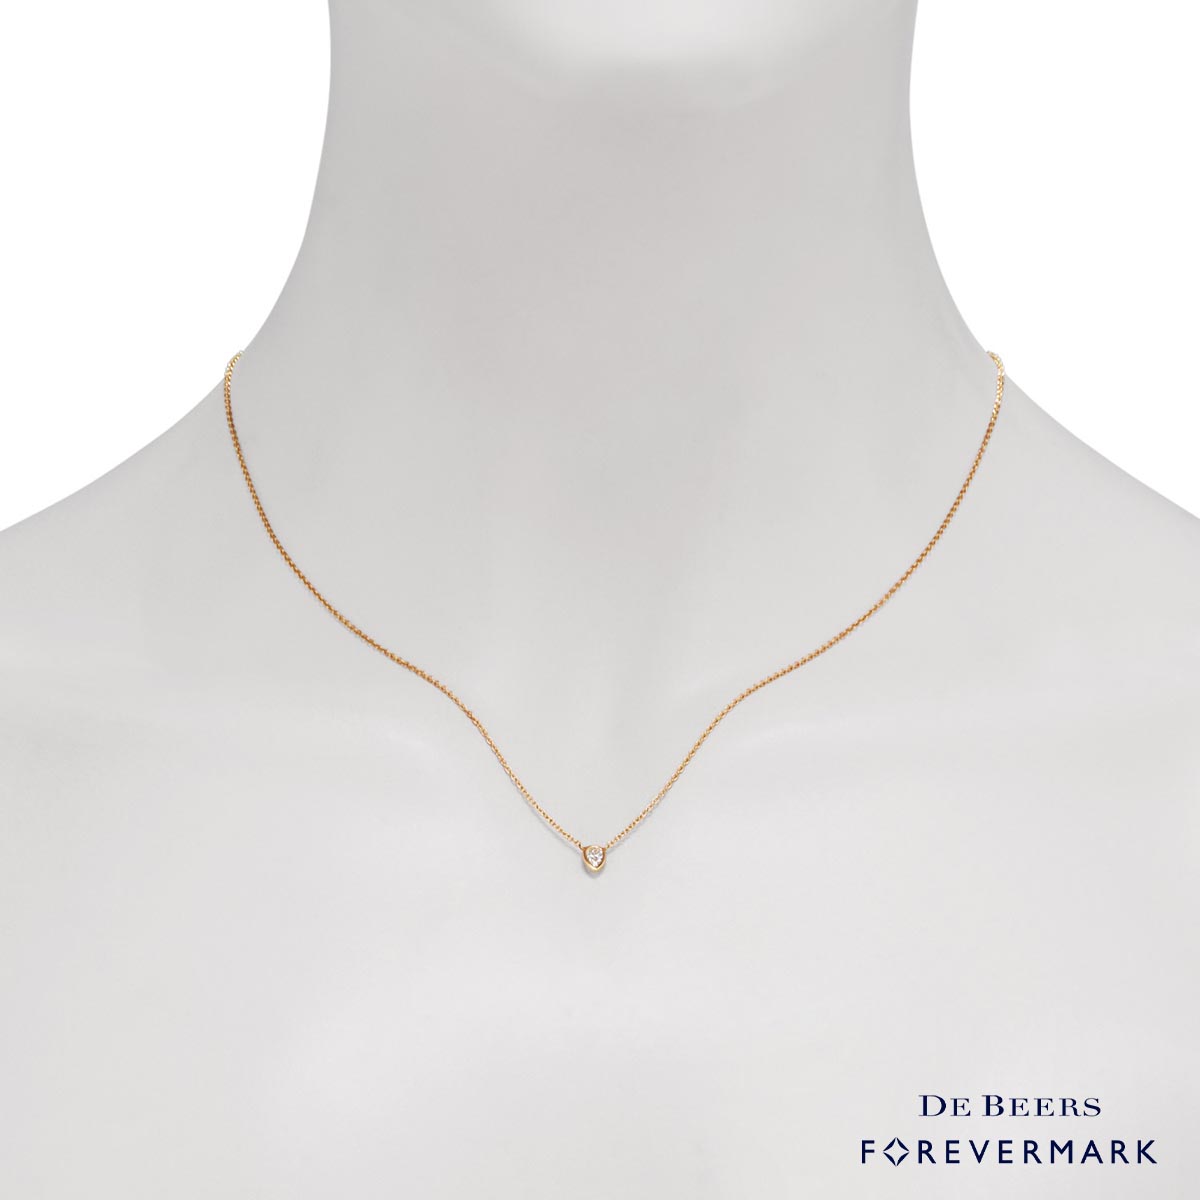 De Beers Forevermark Pear Necklace in 18kt Yellow Gold (1/5ct)